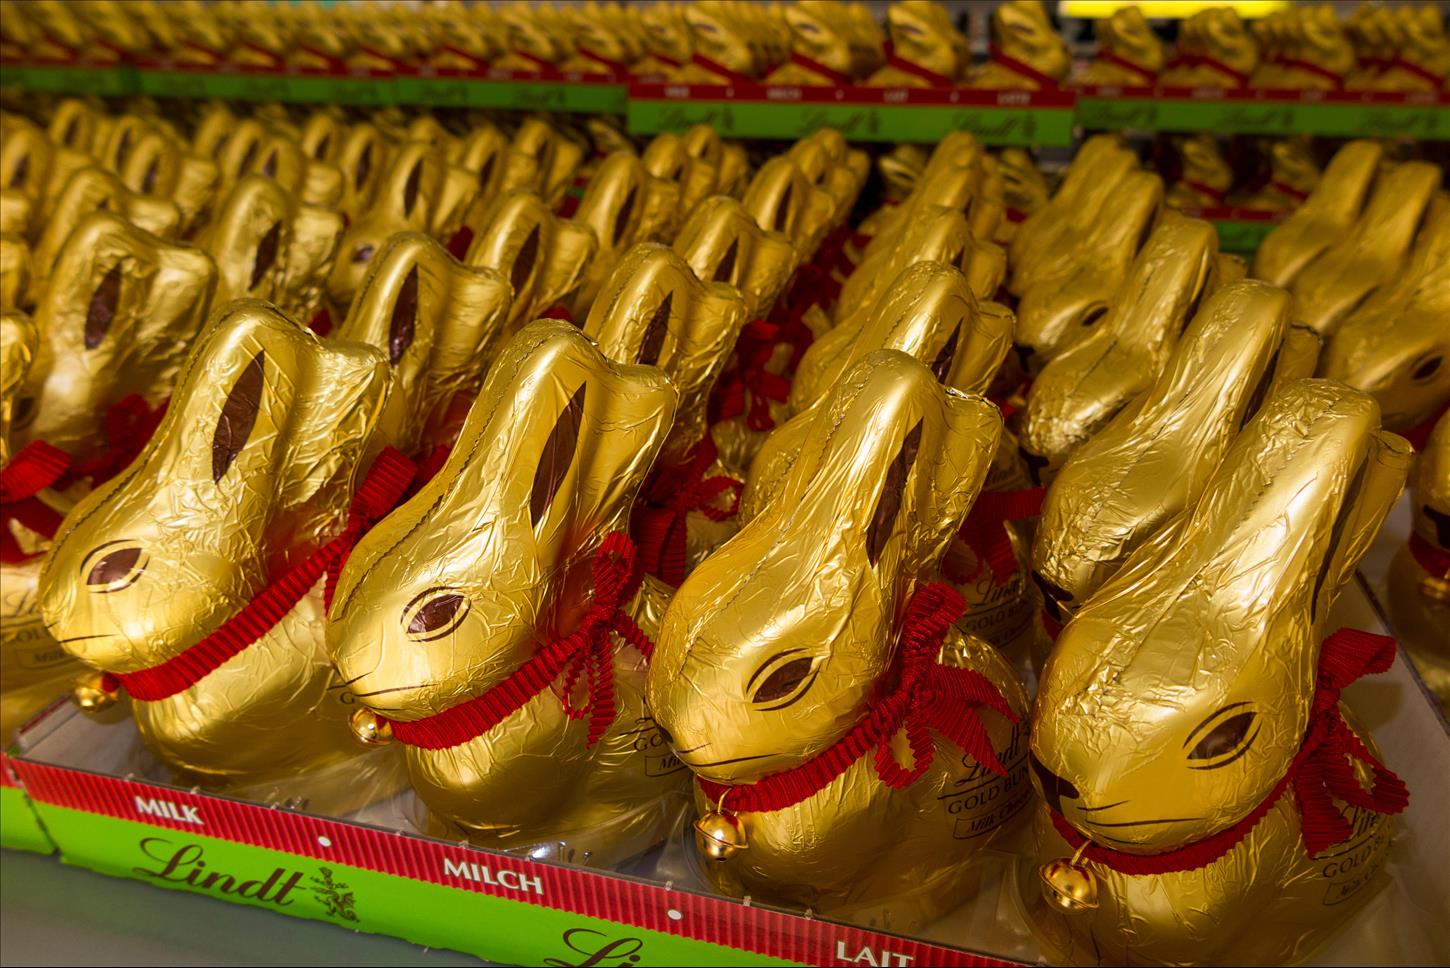 Lindt's Chocolate Bunny Trademark Win Shows Shape Matters To Consumers